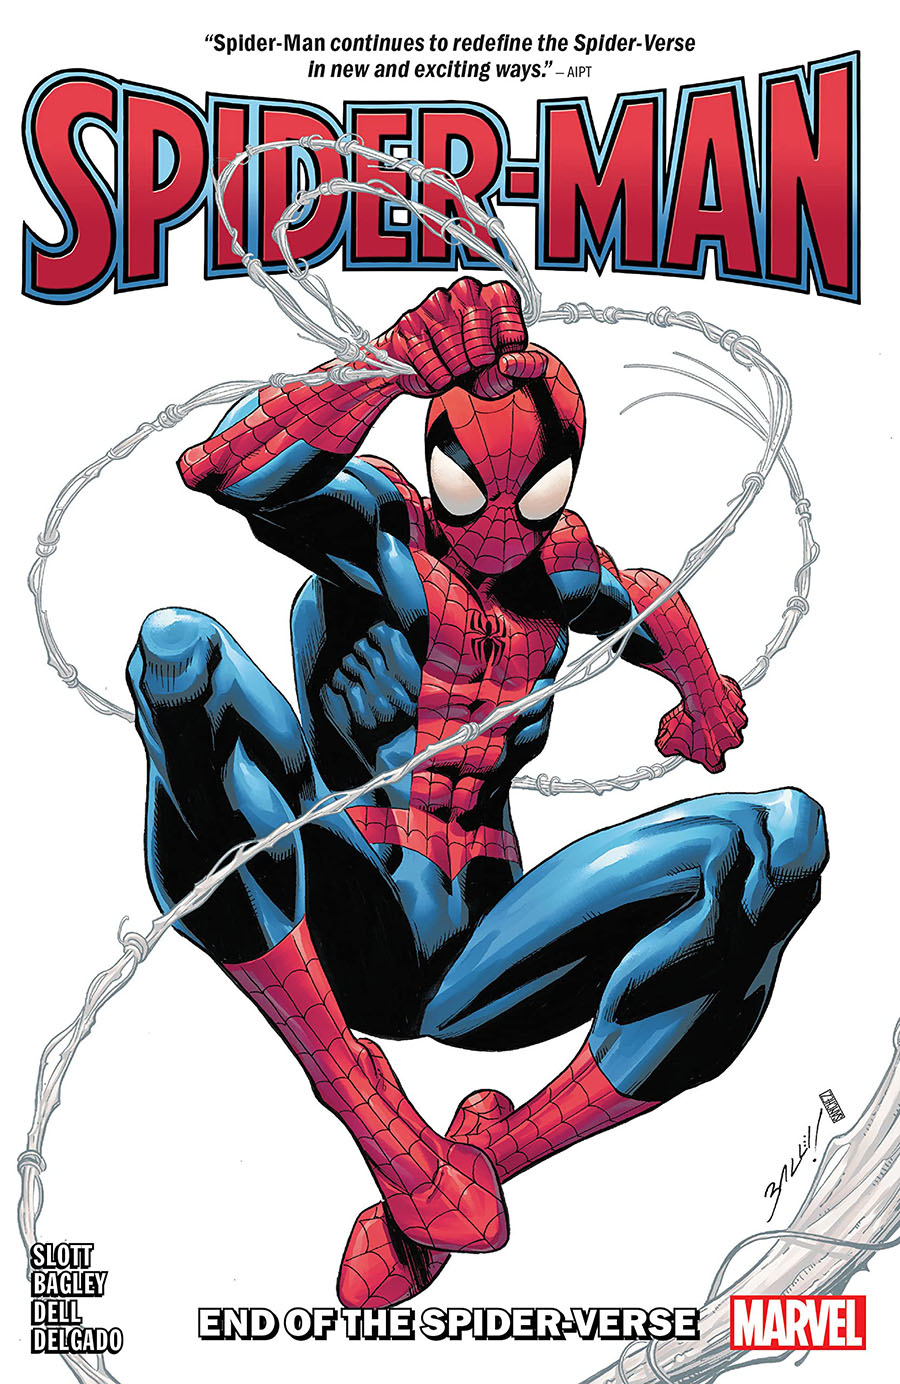 Spider-Man (2022) Vol 1 End Of The Spider-Verse TP